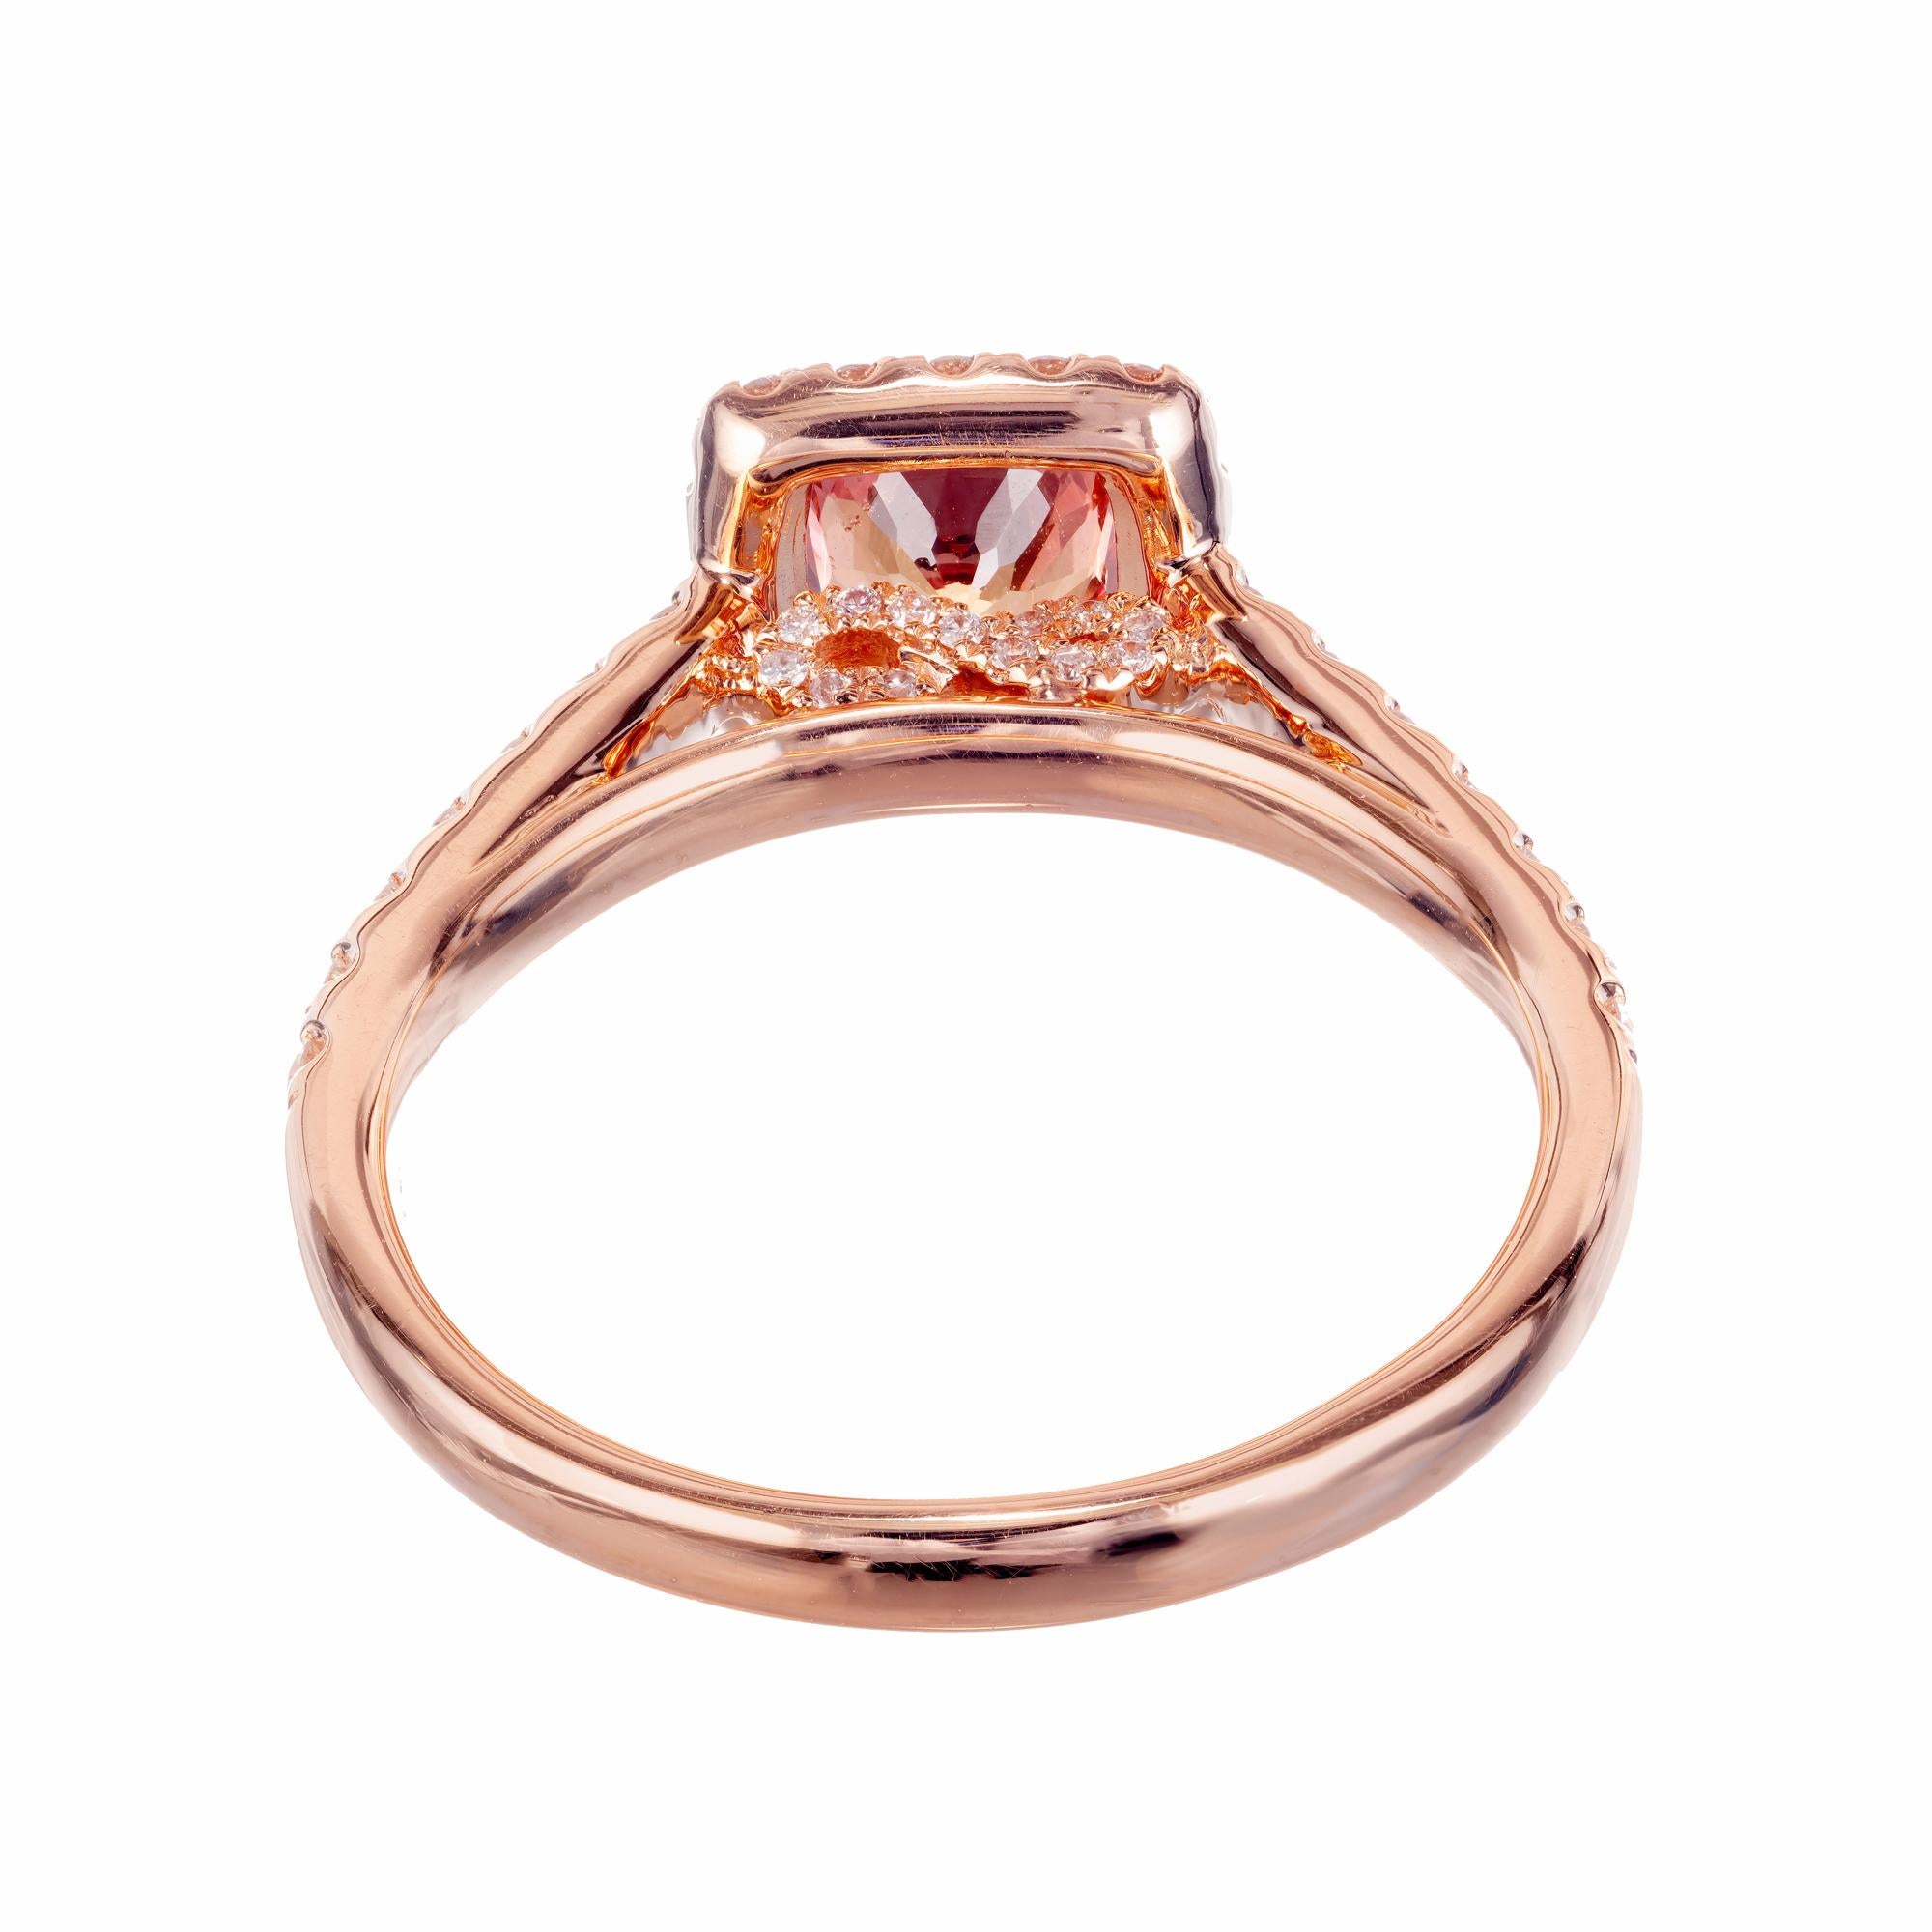 Peter Suchy GIA Certified 1.10 Carat Sapphire Diamond Rose Gold Engagement Ring In New Condition For Sale In Stamford, CT